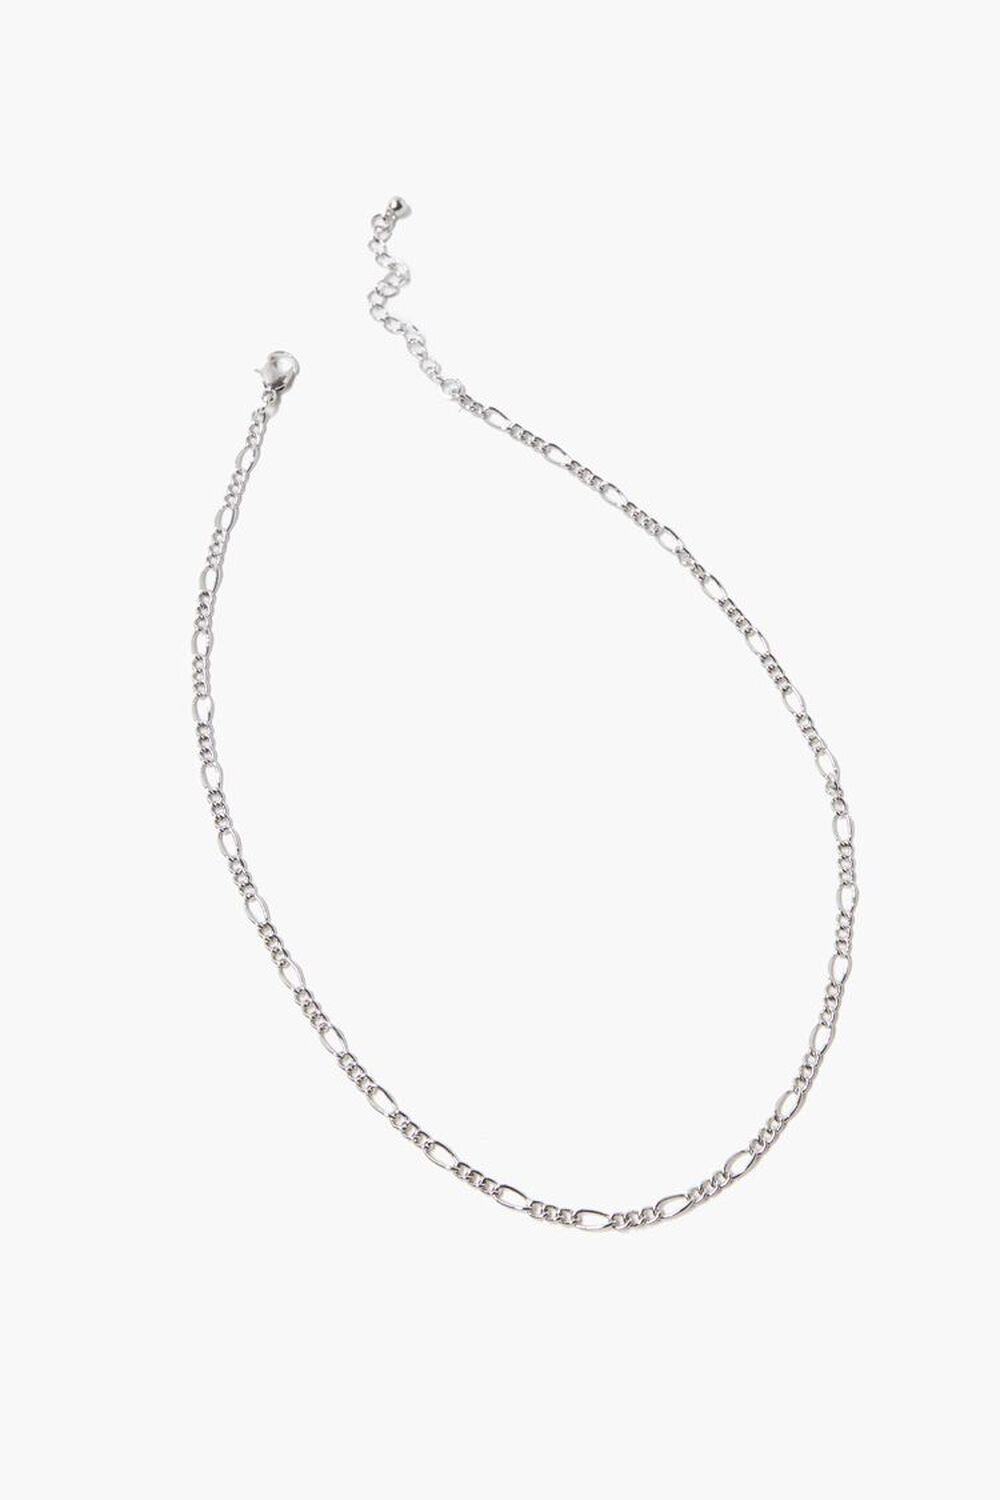 SILVER Curb Chain Necklace, image 2